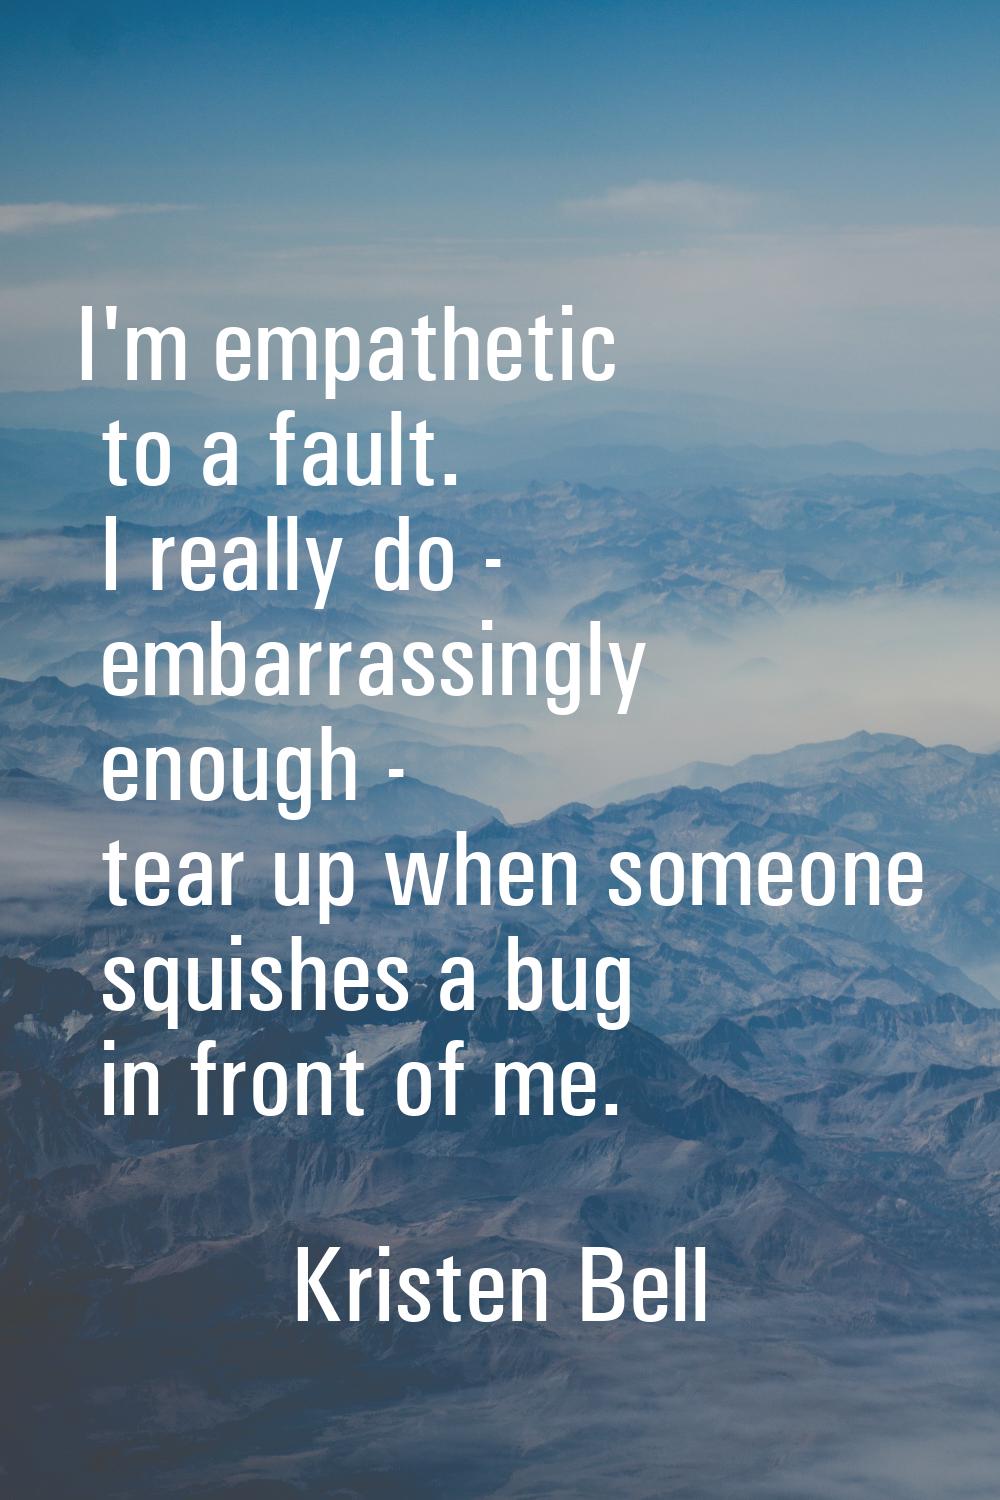 I'm empathetic to a fault. I really do - embarrassingly enough - tear up when someone squishes a bu